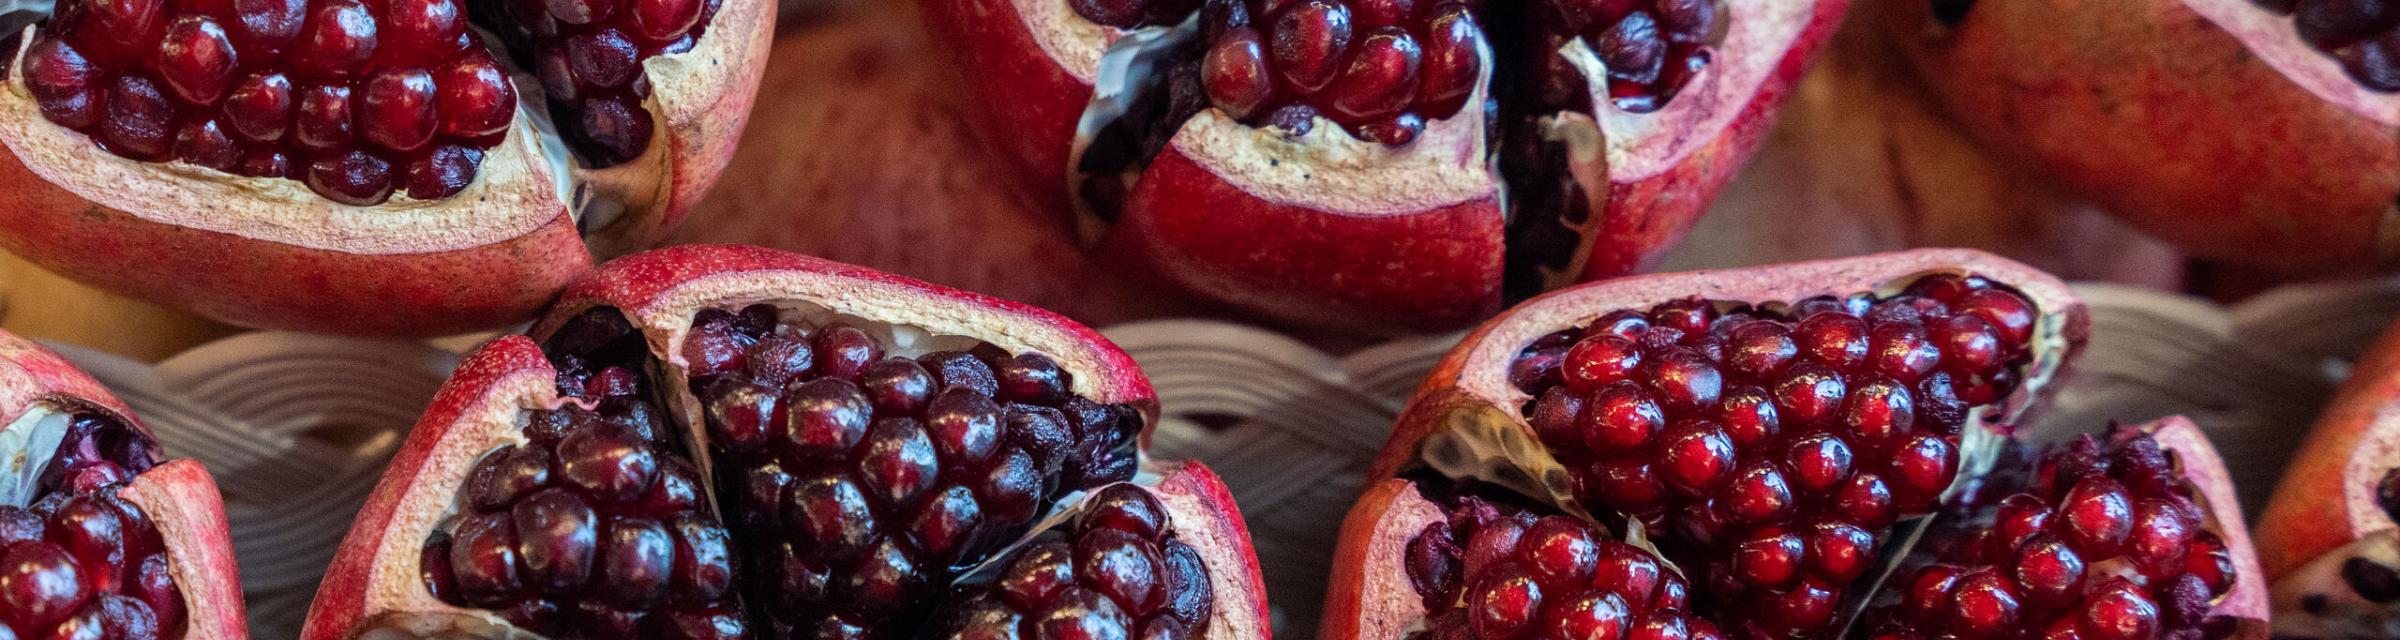 Close-up of cut open pomegranates. Photo by RJ Rempel.